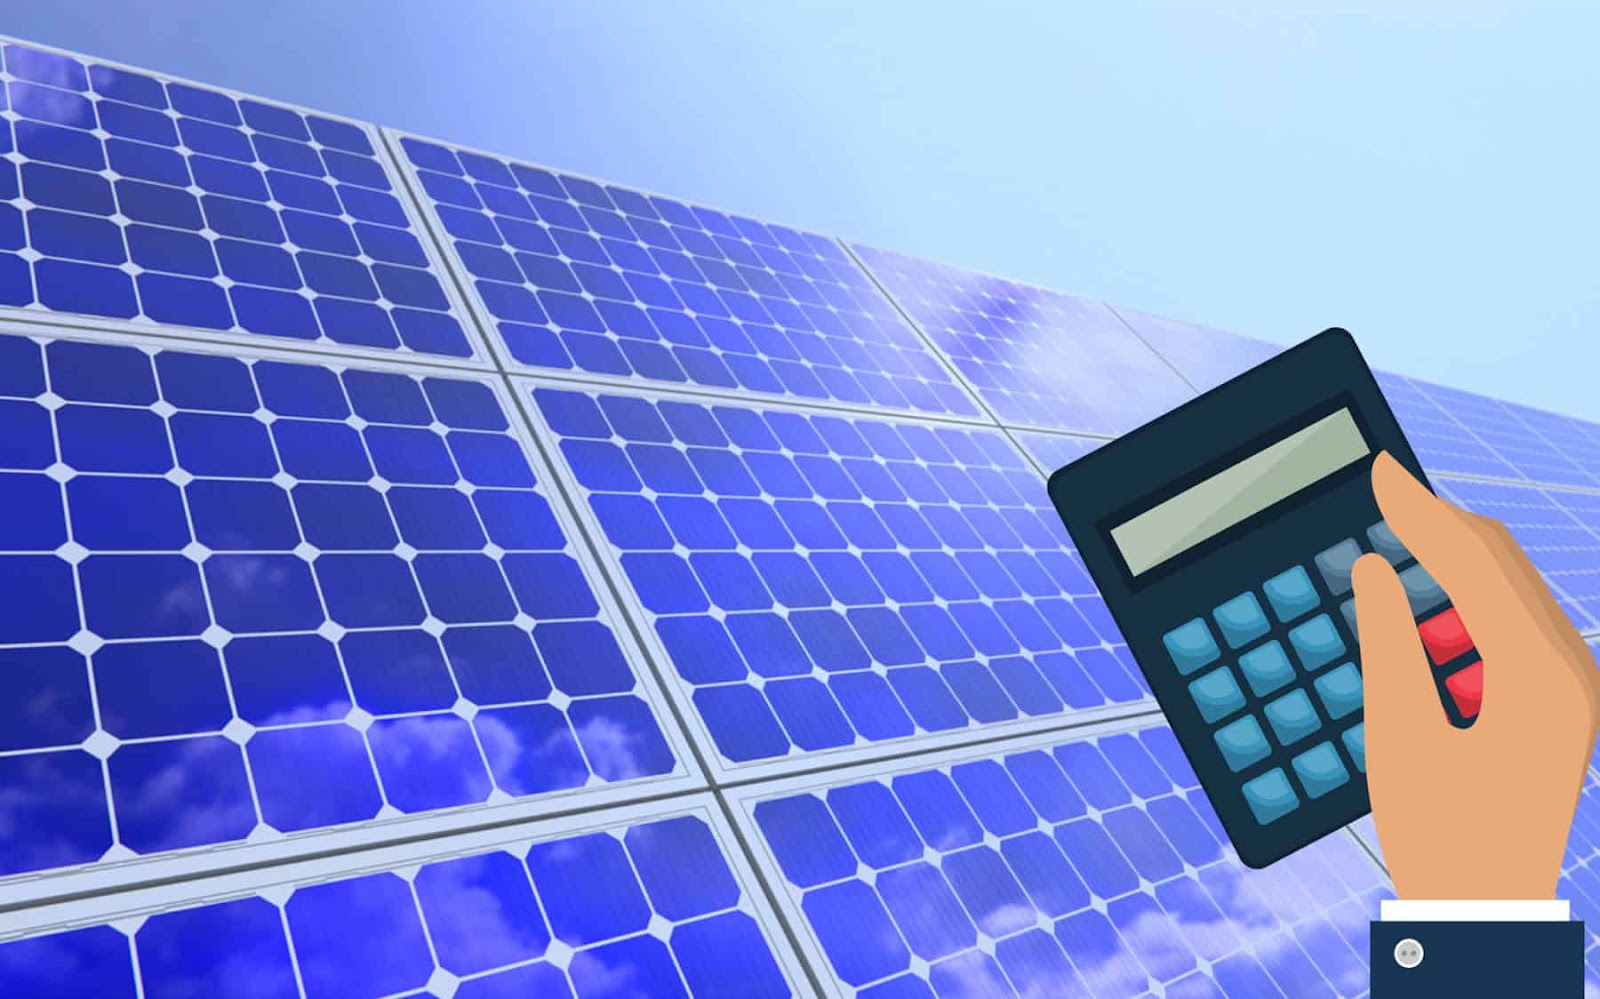 How Much Electricity Does a 1kw Solar Panel Produce?